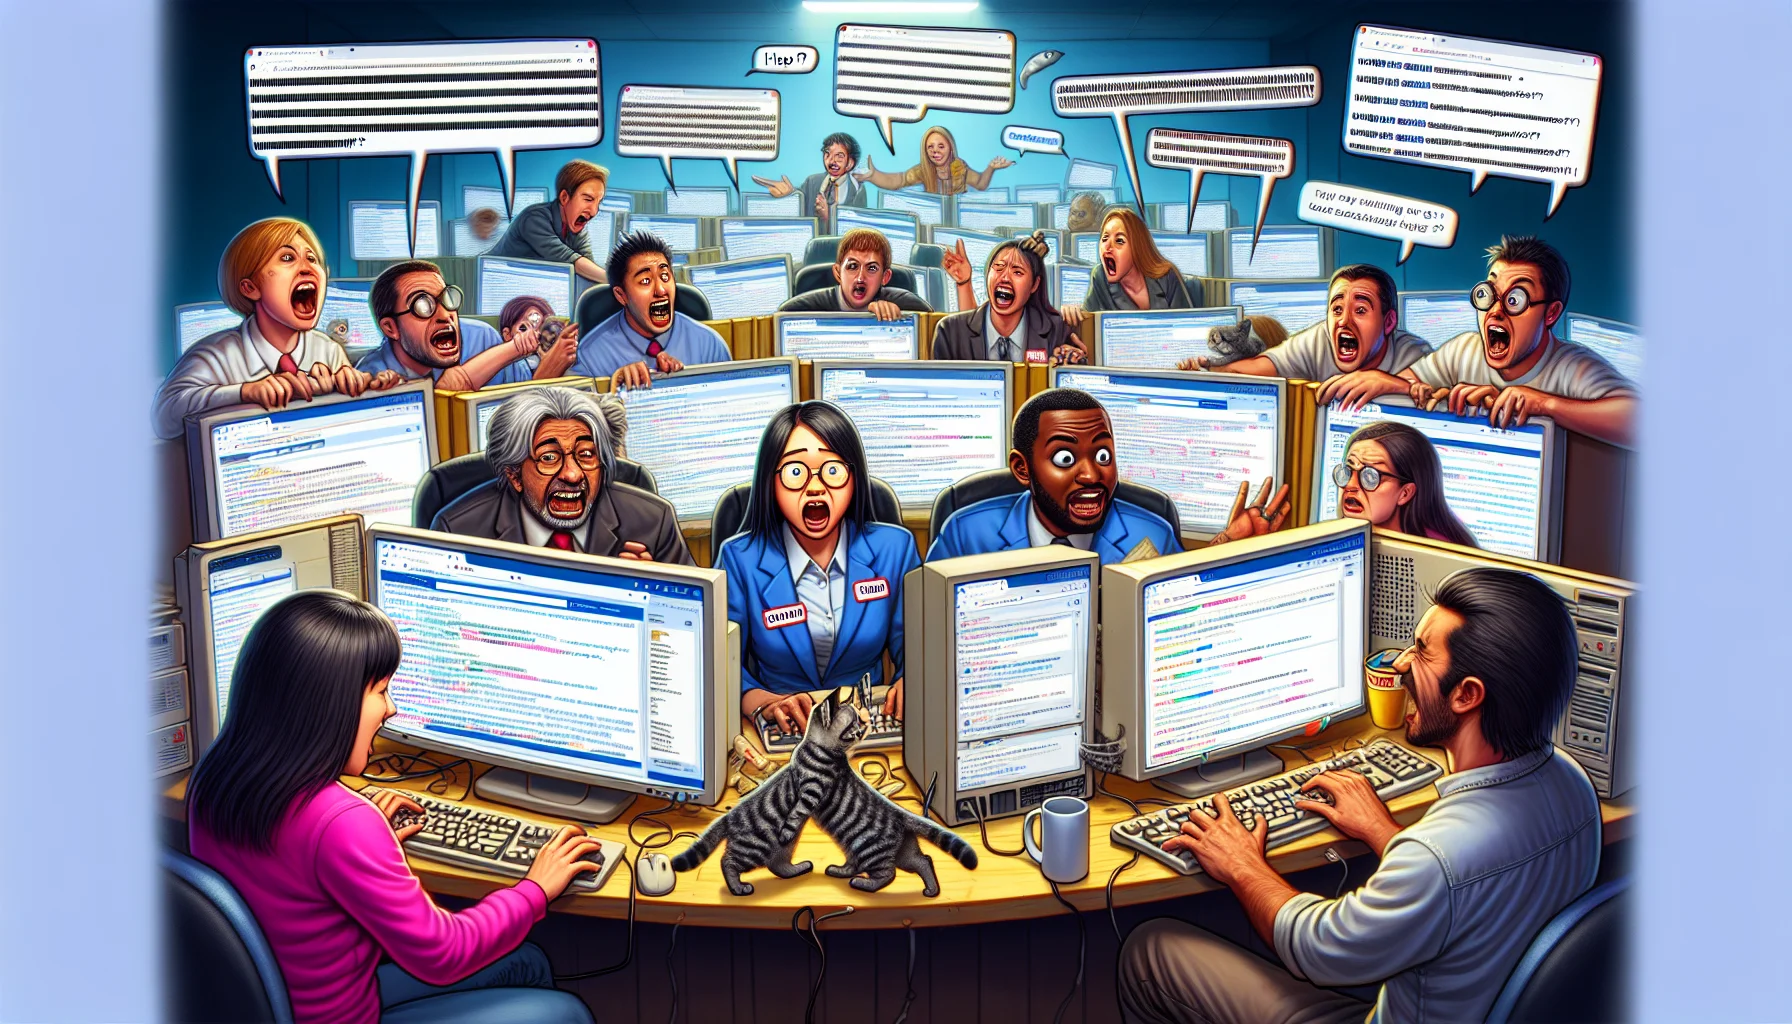 Imaginatively display a comical scenario in a generic web hosting forum. This scene showcases various users frantically typing out their comments and queries while others earnestly try to help. In the background, there are numerous browser windows open, demonstrating the chaotic yet supportive environment typical of such forums. The diverse group of characters includes an Asian female moderator calmly managing the chaos, a Black male with multiple computer screens trying to provide solutions, and a Hispanic female newbie seeking help. Enhance the humor by including typical internet expressions and humor, such as memes and adorable internet cats walking across keyboards.